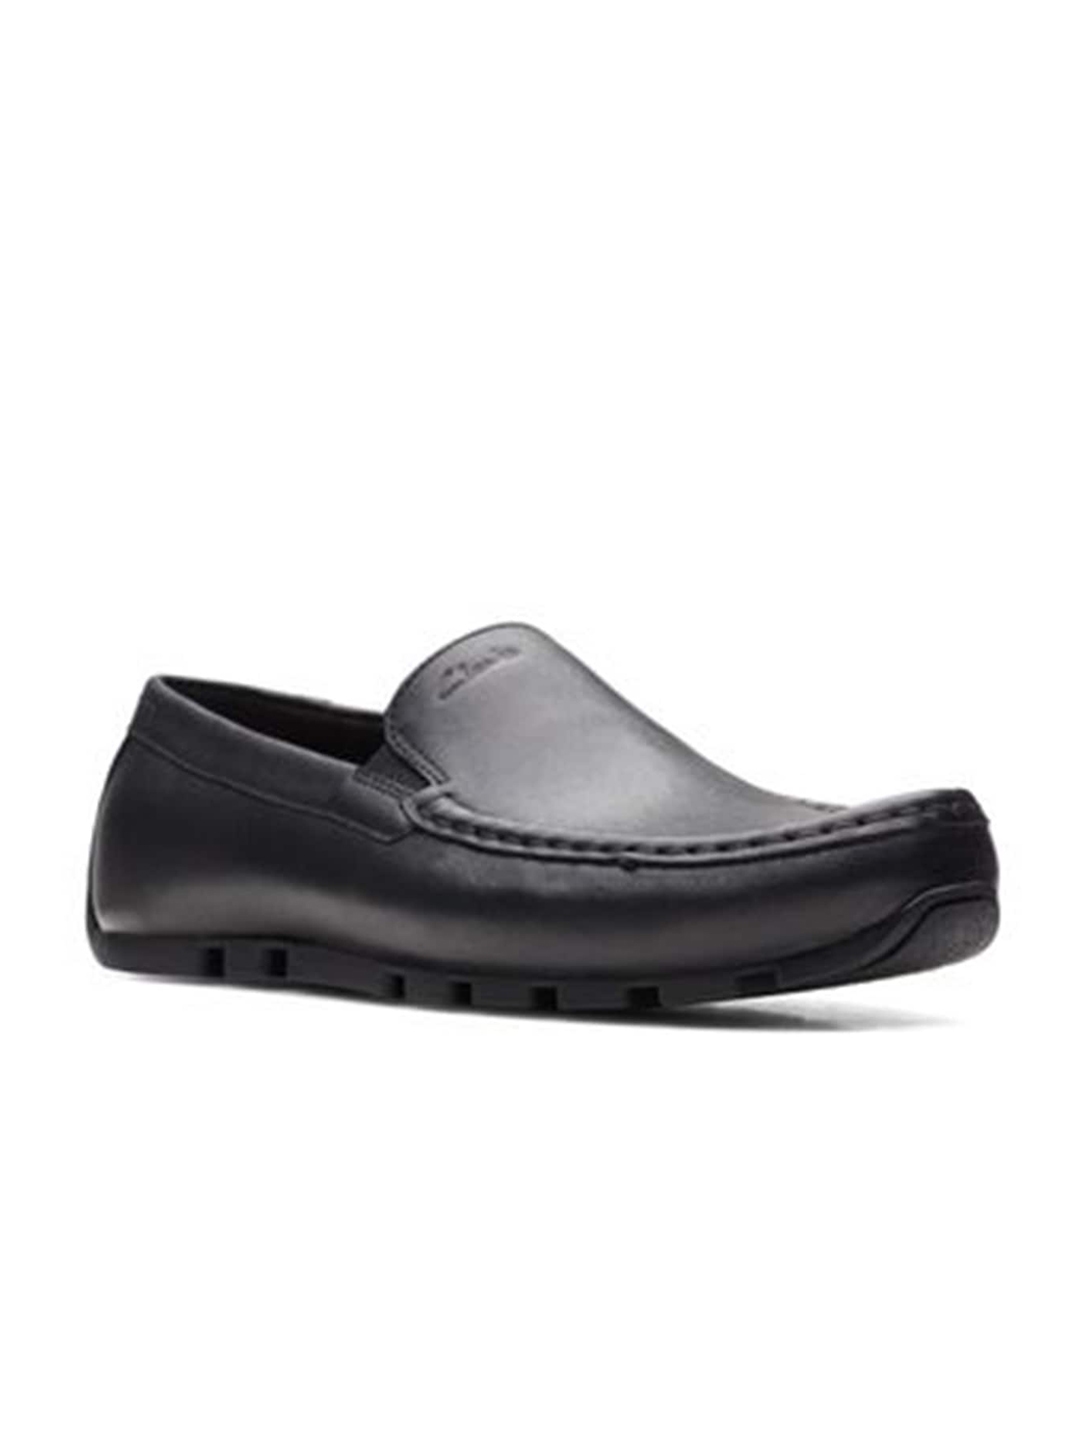 Buy Clarks Men Black Leather Loafers - Casual Shoes for Men 17312200 ...